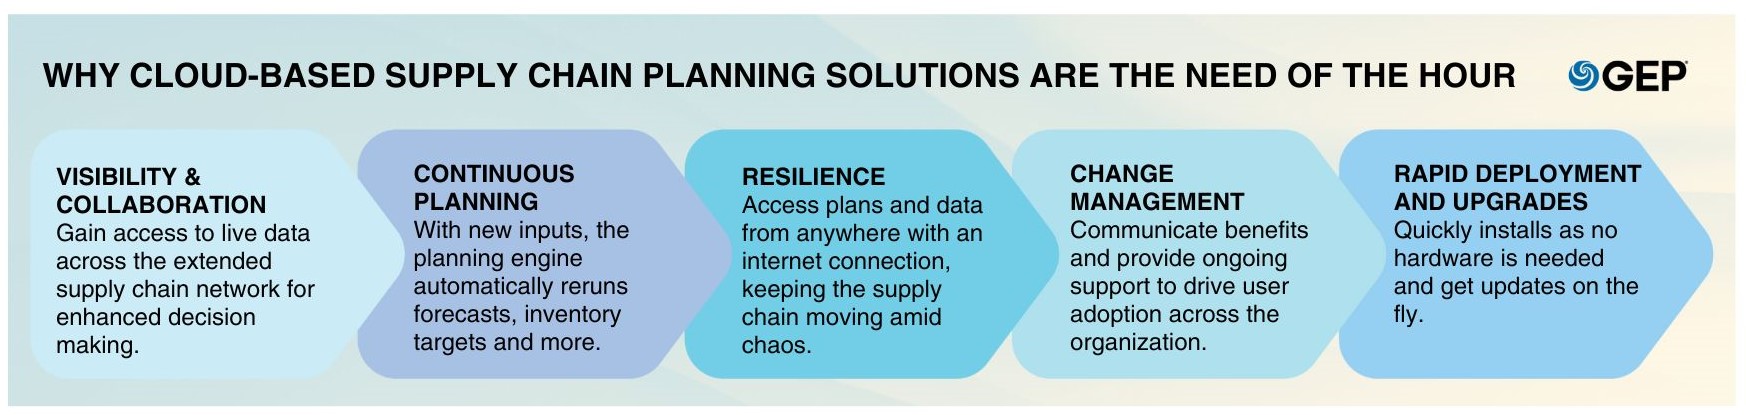 a-short-guide-to-cloud-based-supply-chain-planning